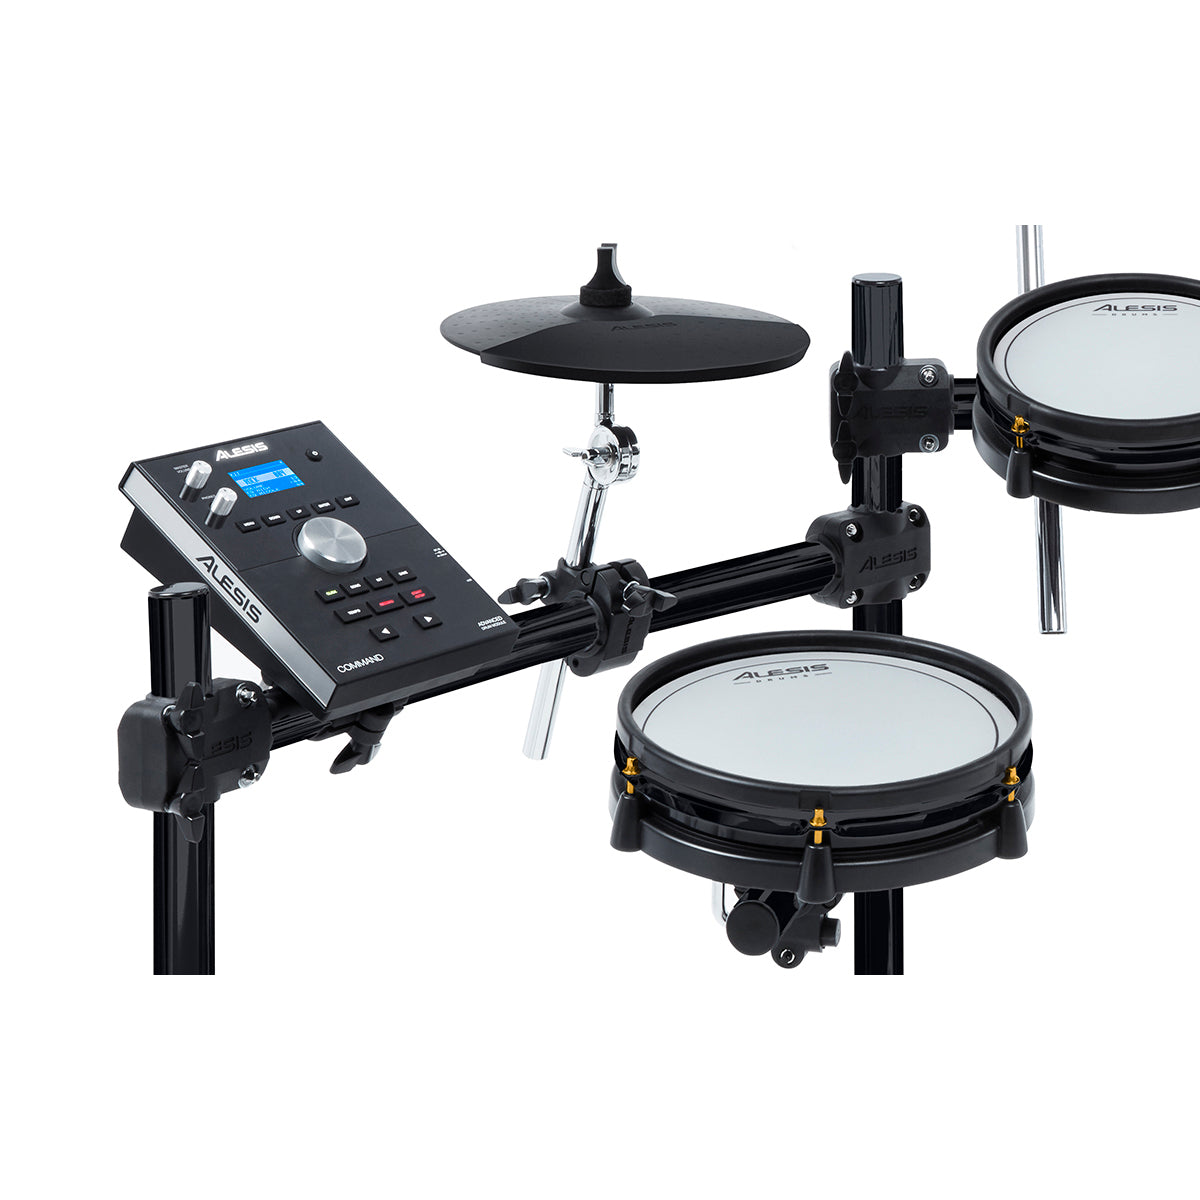 Alesis COMMAND MESHKIT SE Special Edition Electronic Drum Kit